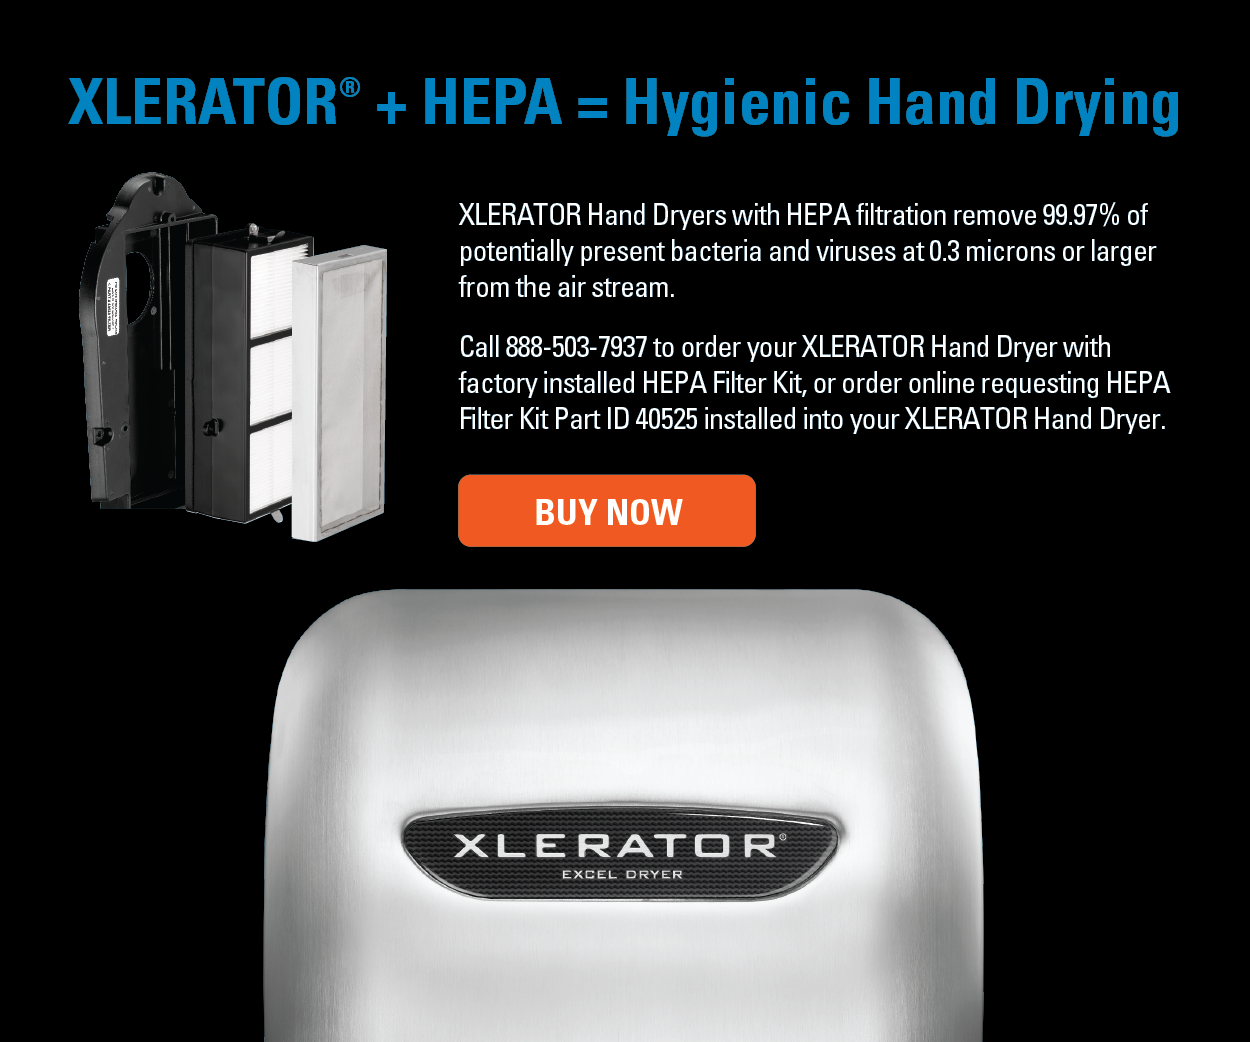 hygienic-hand-dryers-banner-ad-v4-01-002-.png